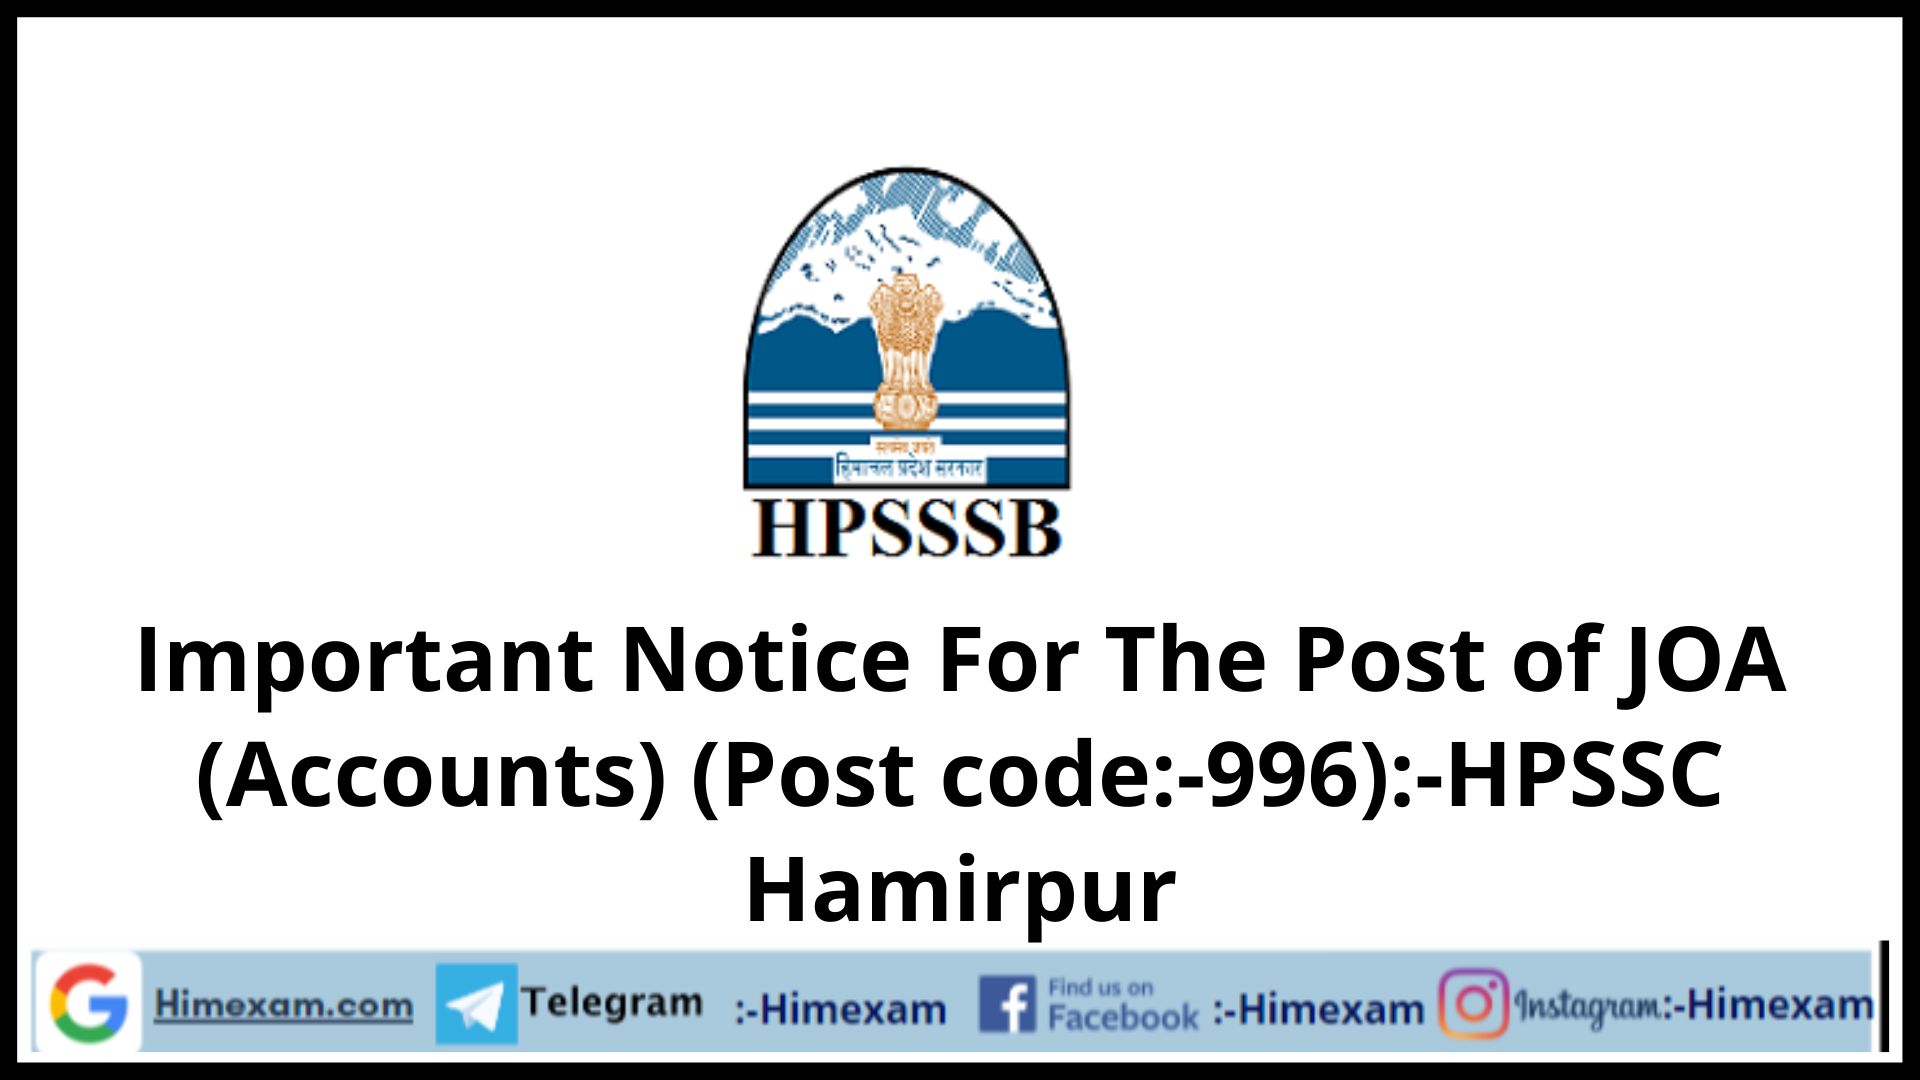 Important Notice For The Post of JOA (Accounts) (Post code:-996):-HPSSC Hamirpur